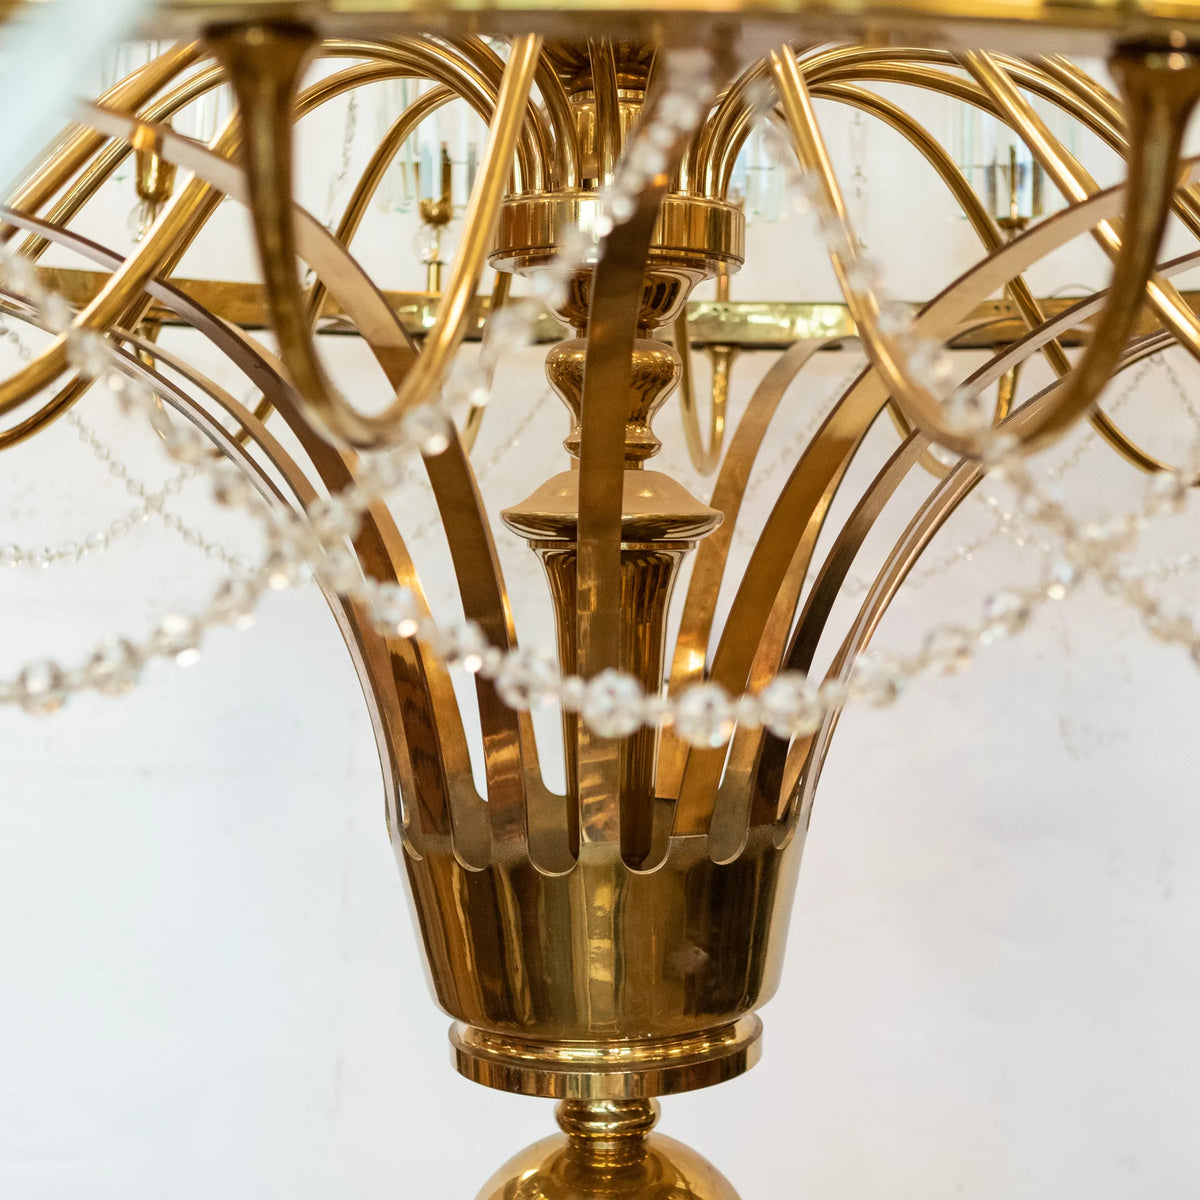 Giant Reclaimed Brass &amp; Crystal Chandelier | &gt;4m Tall | The Architectural Forum